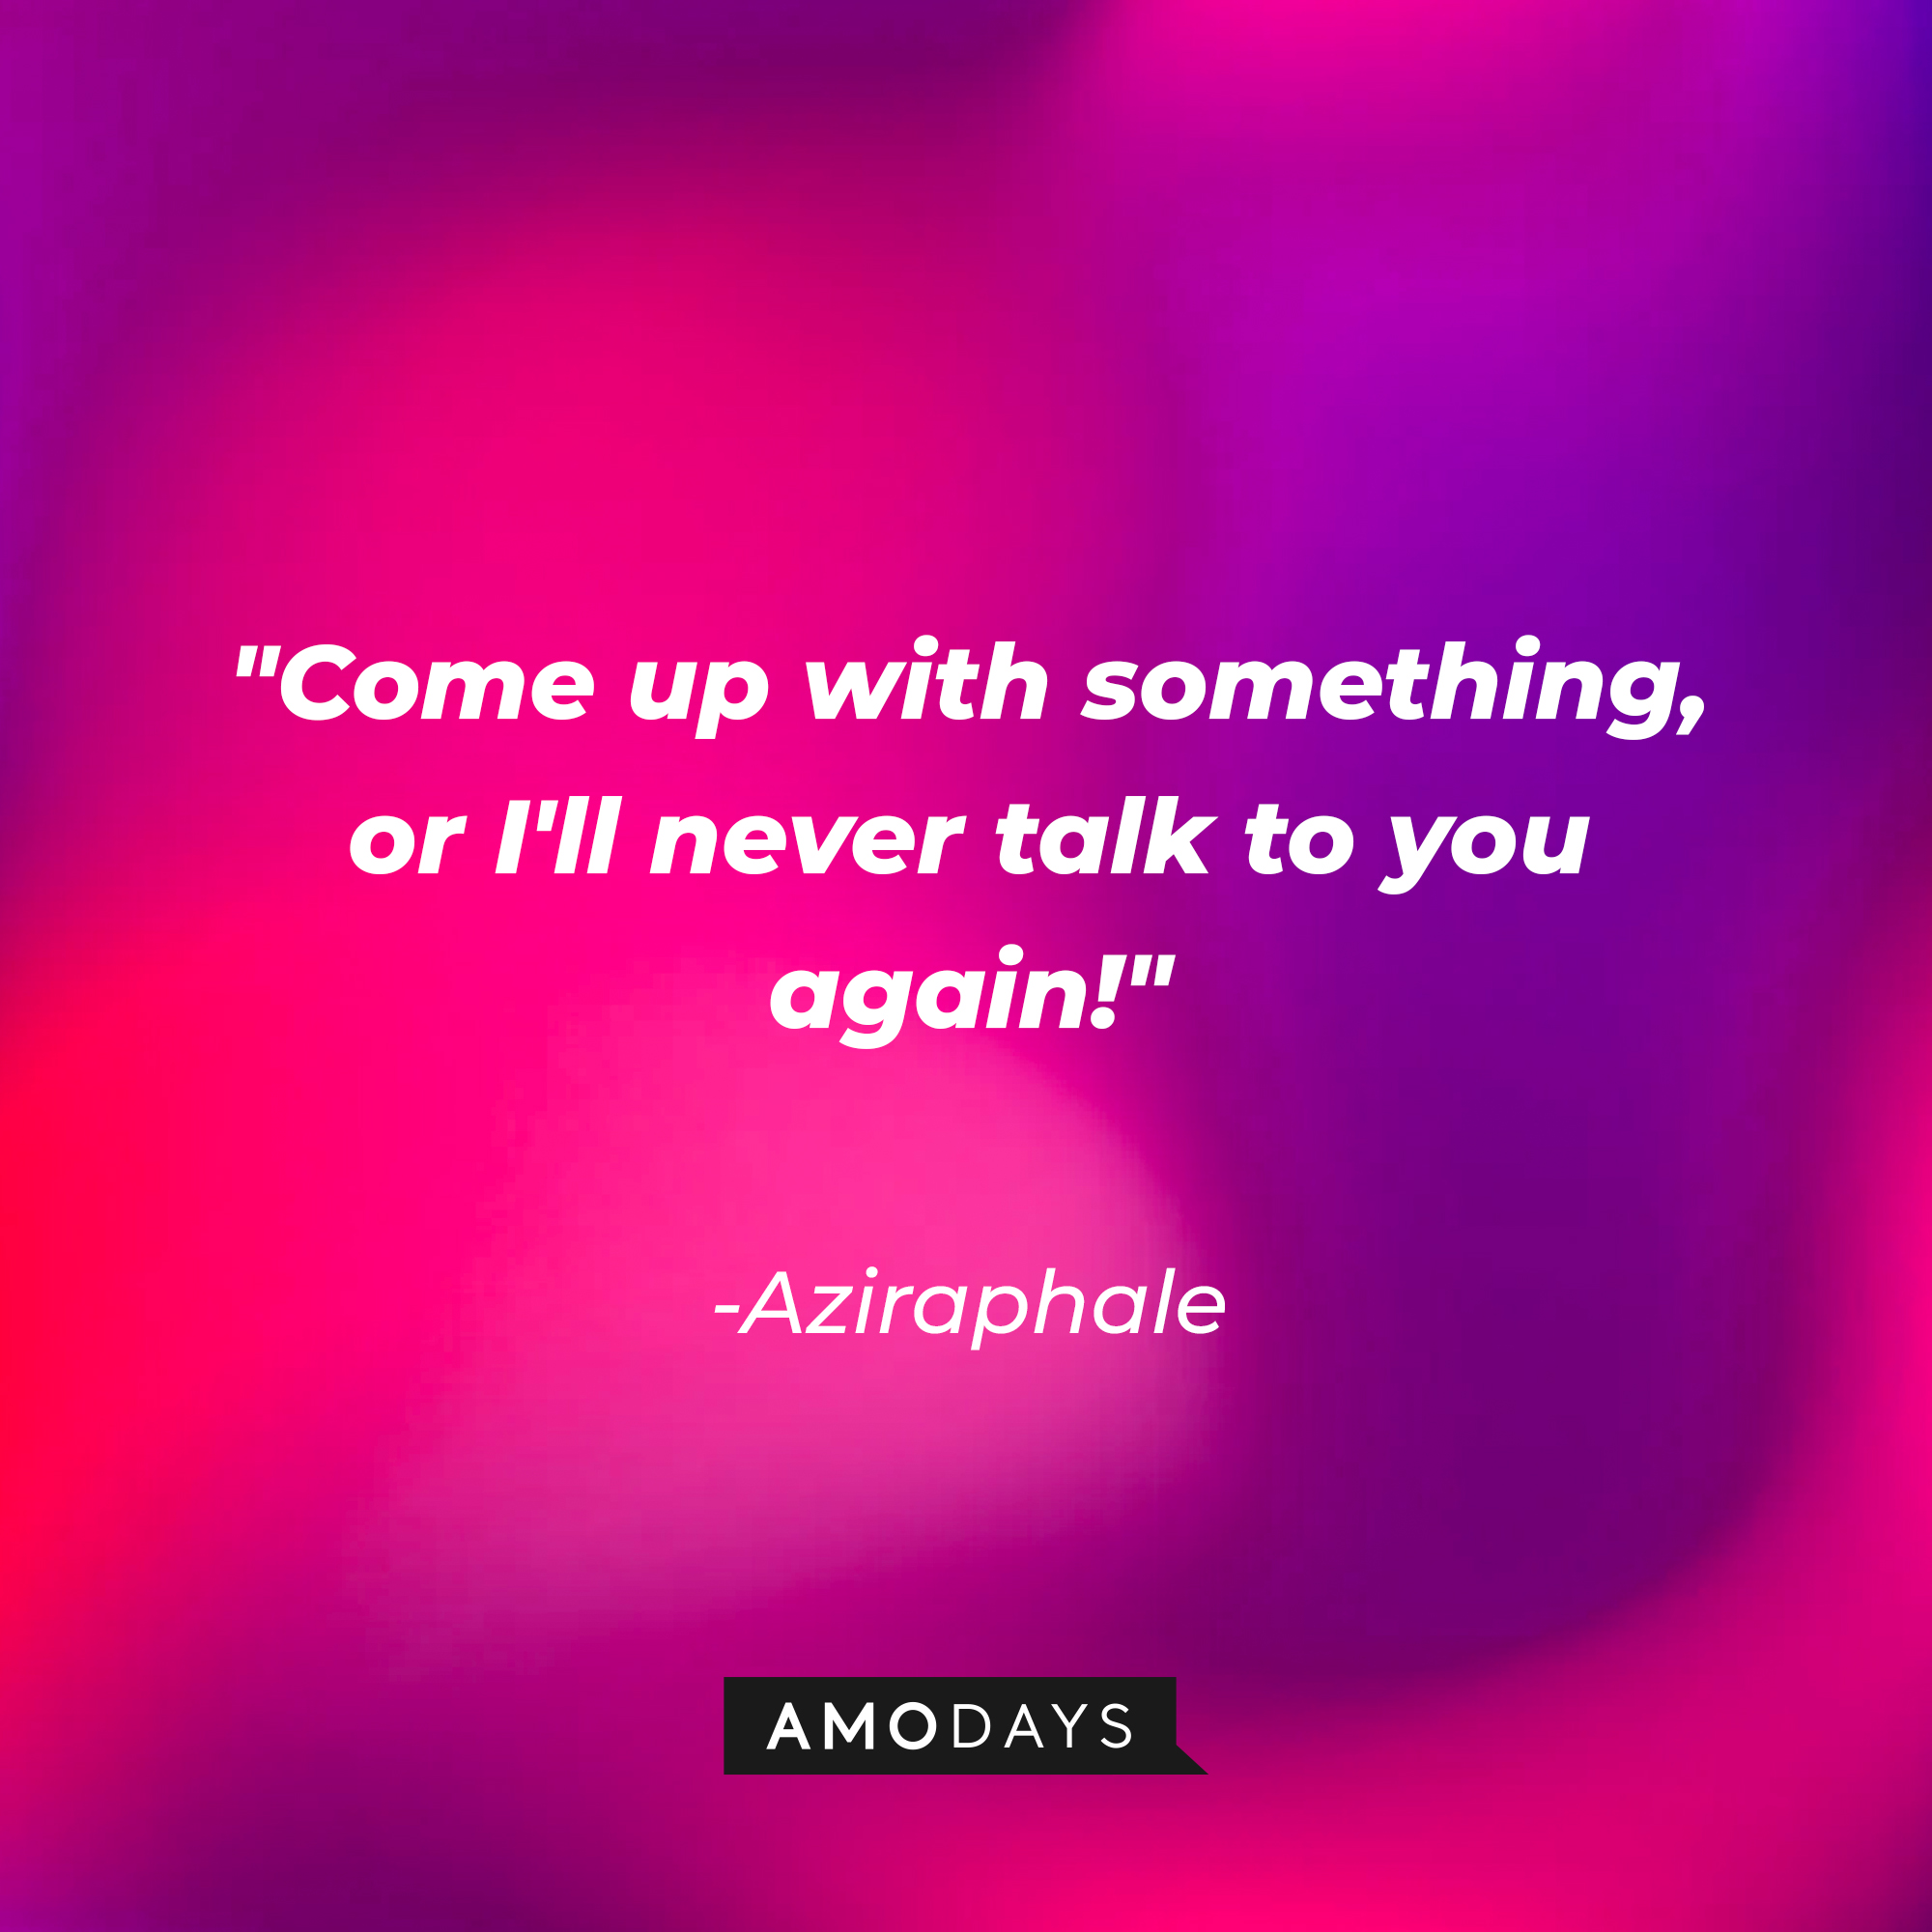 Aziraphale's quote: "Come up with something, or I'll never talk to you again!" | Source: AmoDays